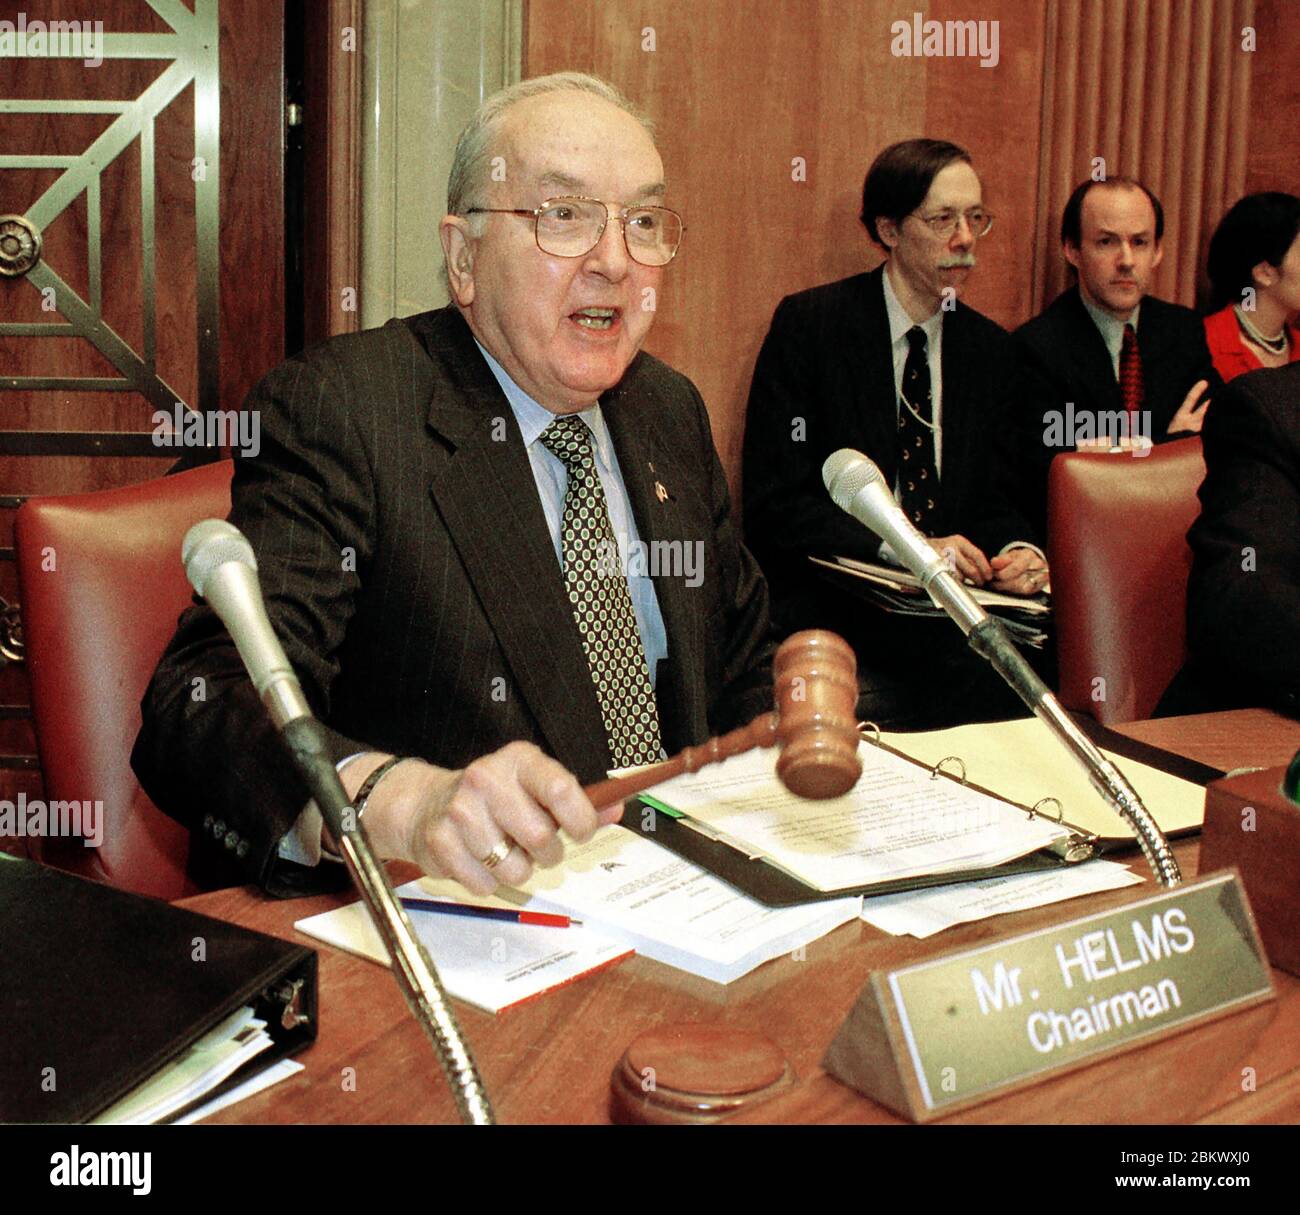 United States Senator Jesse Helms (Republican of North Carolina), Chairman, US Senate Foreign Relations Committee, calls the committee to order on Capitol Hill in Washington, DC on October 7, 1999.  The committee is holding a hearing to consider the Comprehensive Test Ban Treaty. Credit: Ron Sachs / CNP / MediaPunch Stock Photo